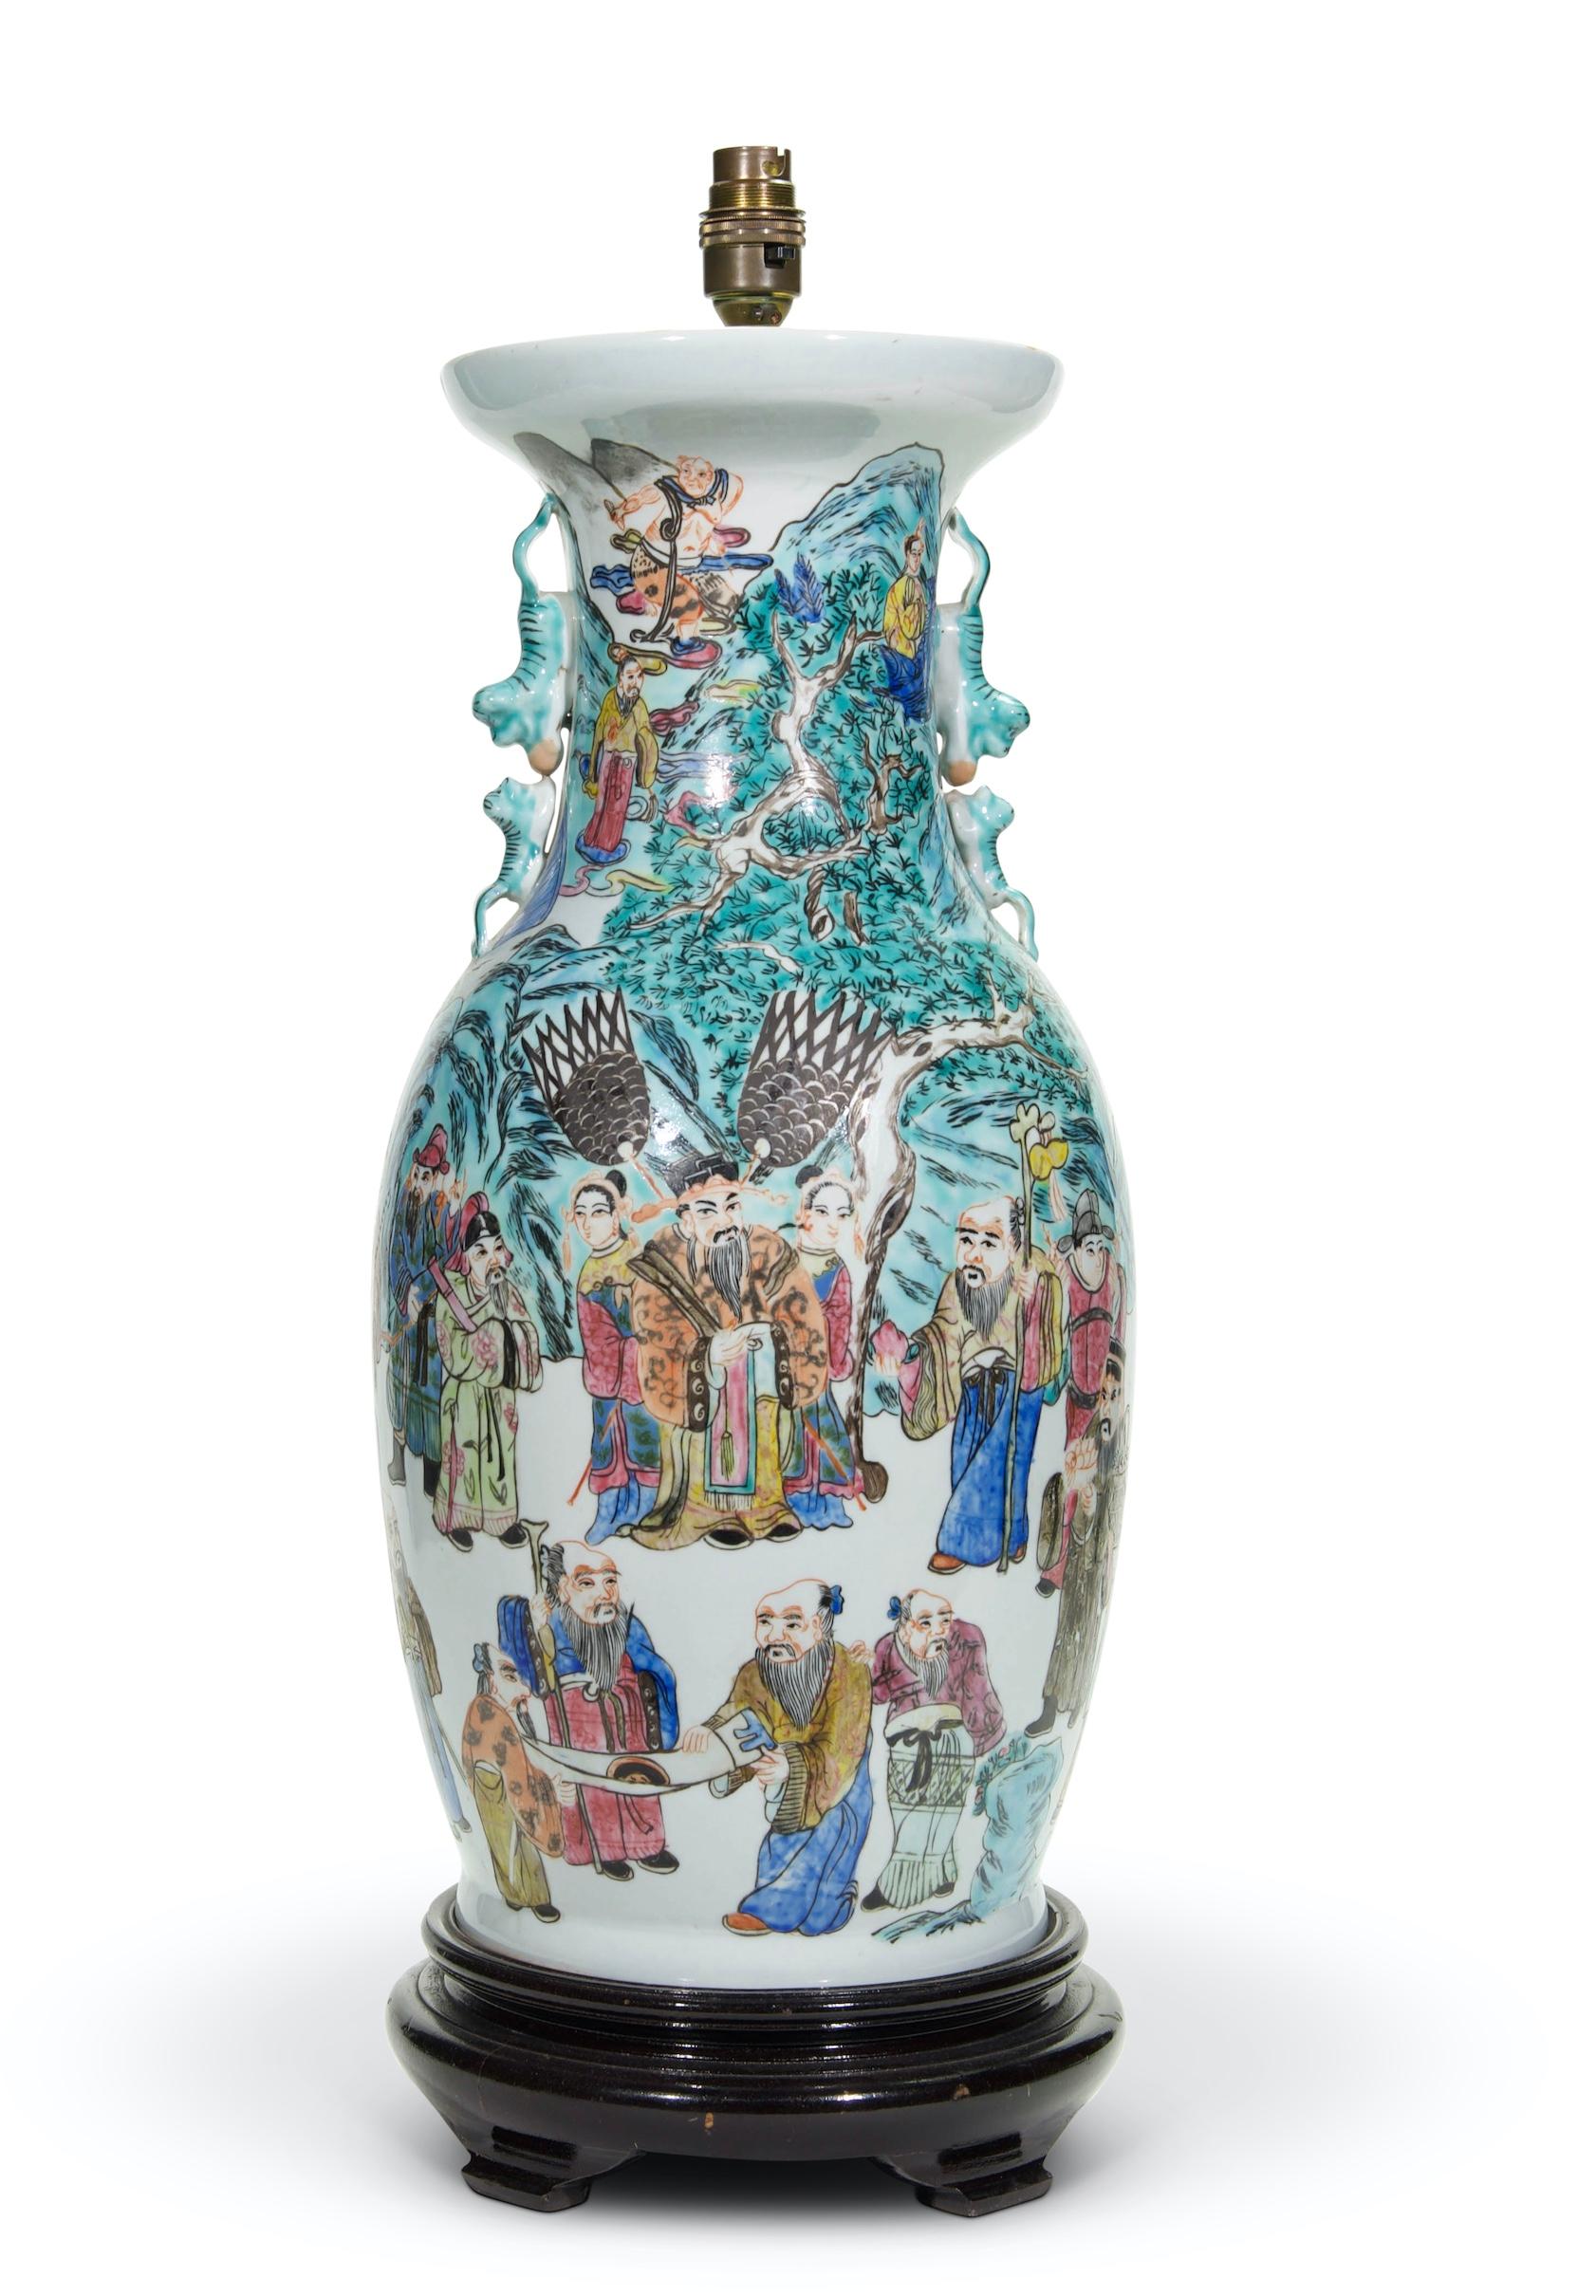 A fine large Chinese famille verte vase of baluster form, beautifully decorated with a procession of Chinese figures wearing traditional clothing within hilly landscape scenery, on a white background, with stylized dragon handles to the neck, now